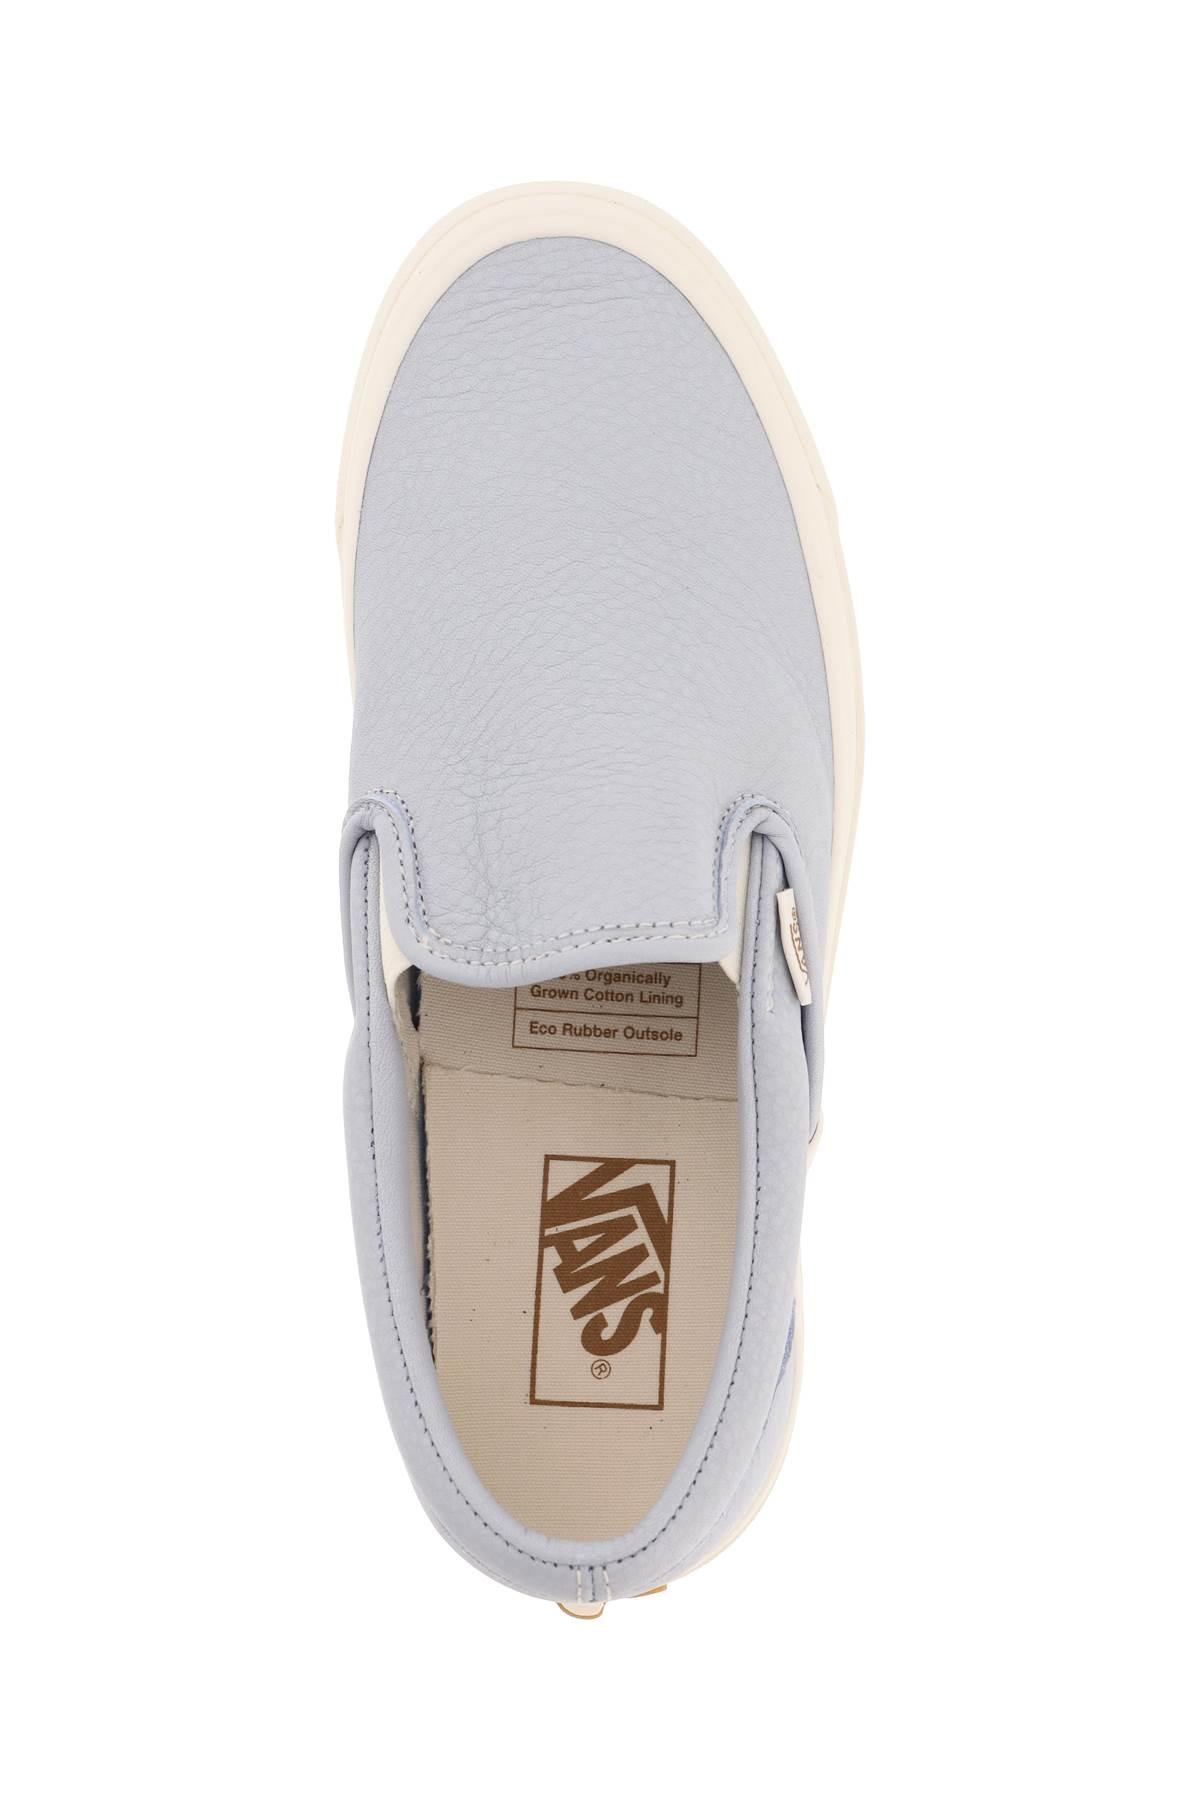 Vans Leather Classic Slip-on Eco Theory Sneakers in Light Blue - Save 25% White Womens Trainers Vans Trainers 